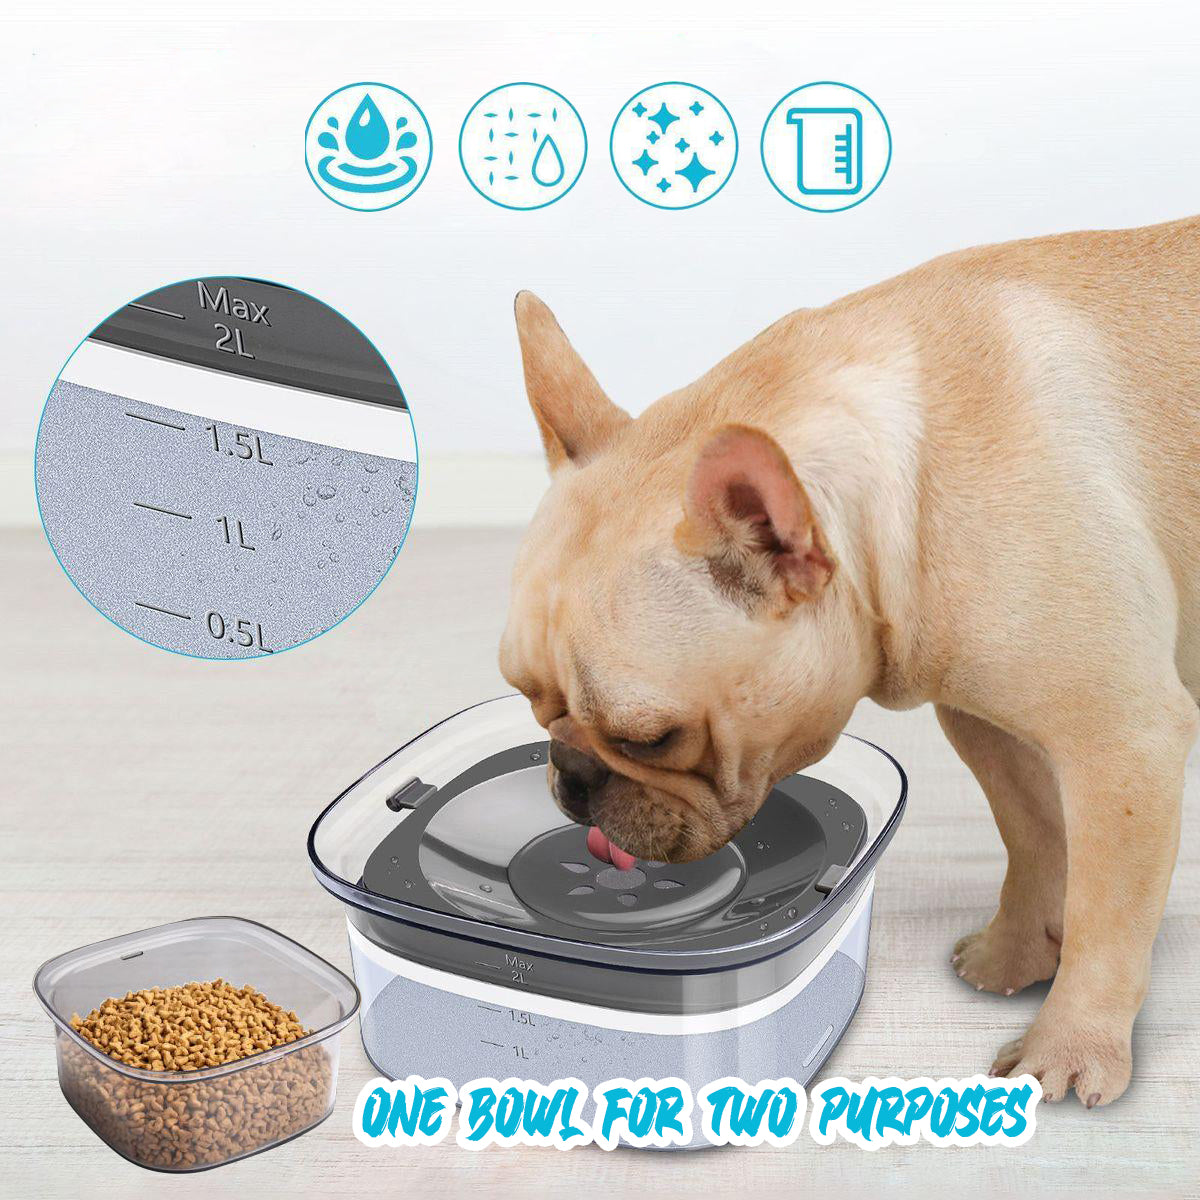 AquaSip-Frenchie-Floating-Water-Bowl-Slow-Drinking-Dispenser-for-Hydrated-Pets-www.frenchie.shop